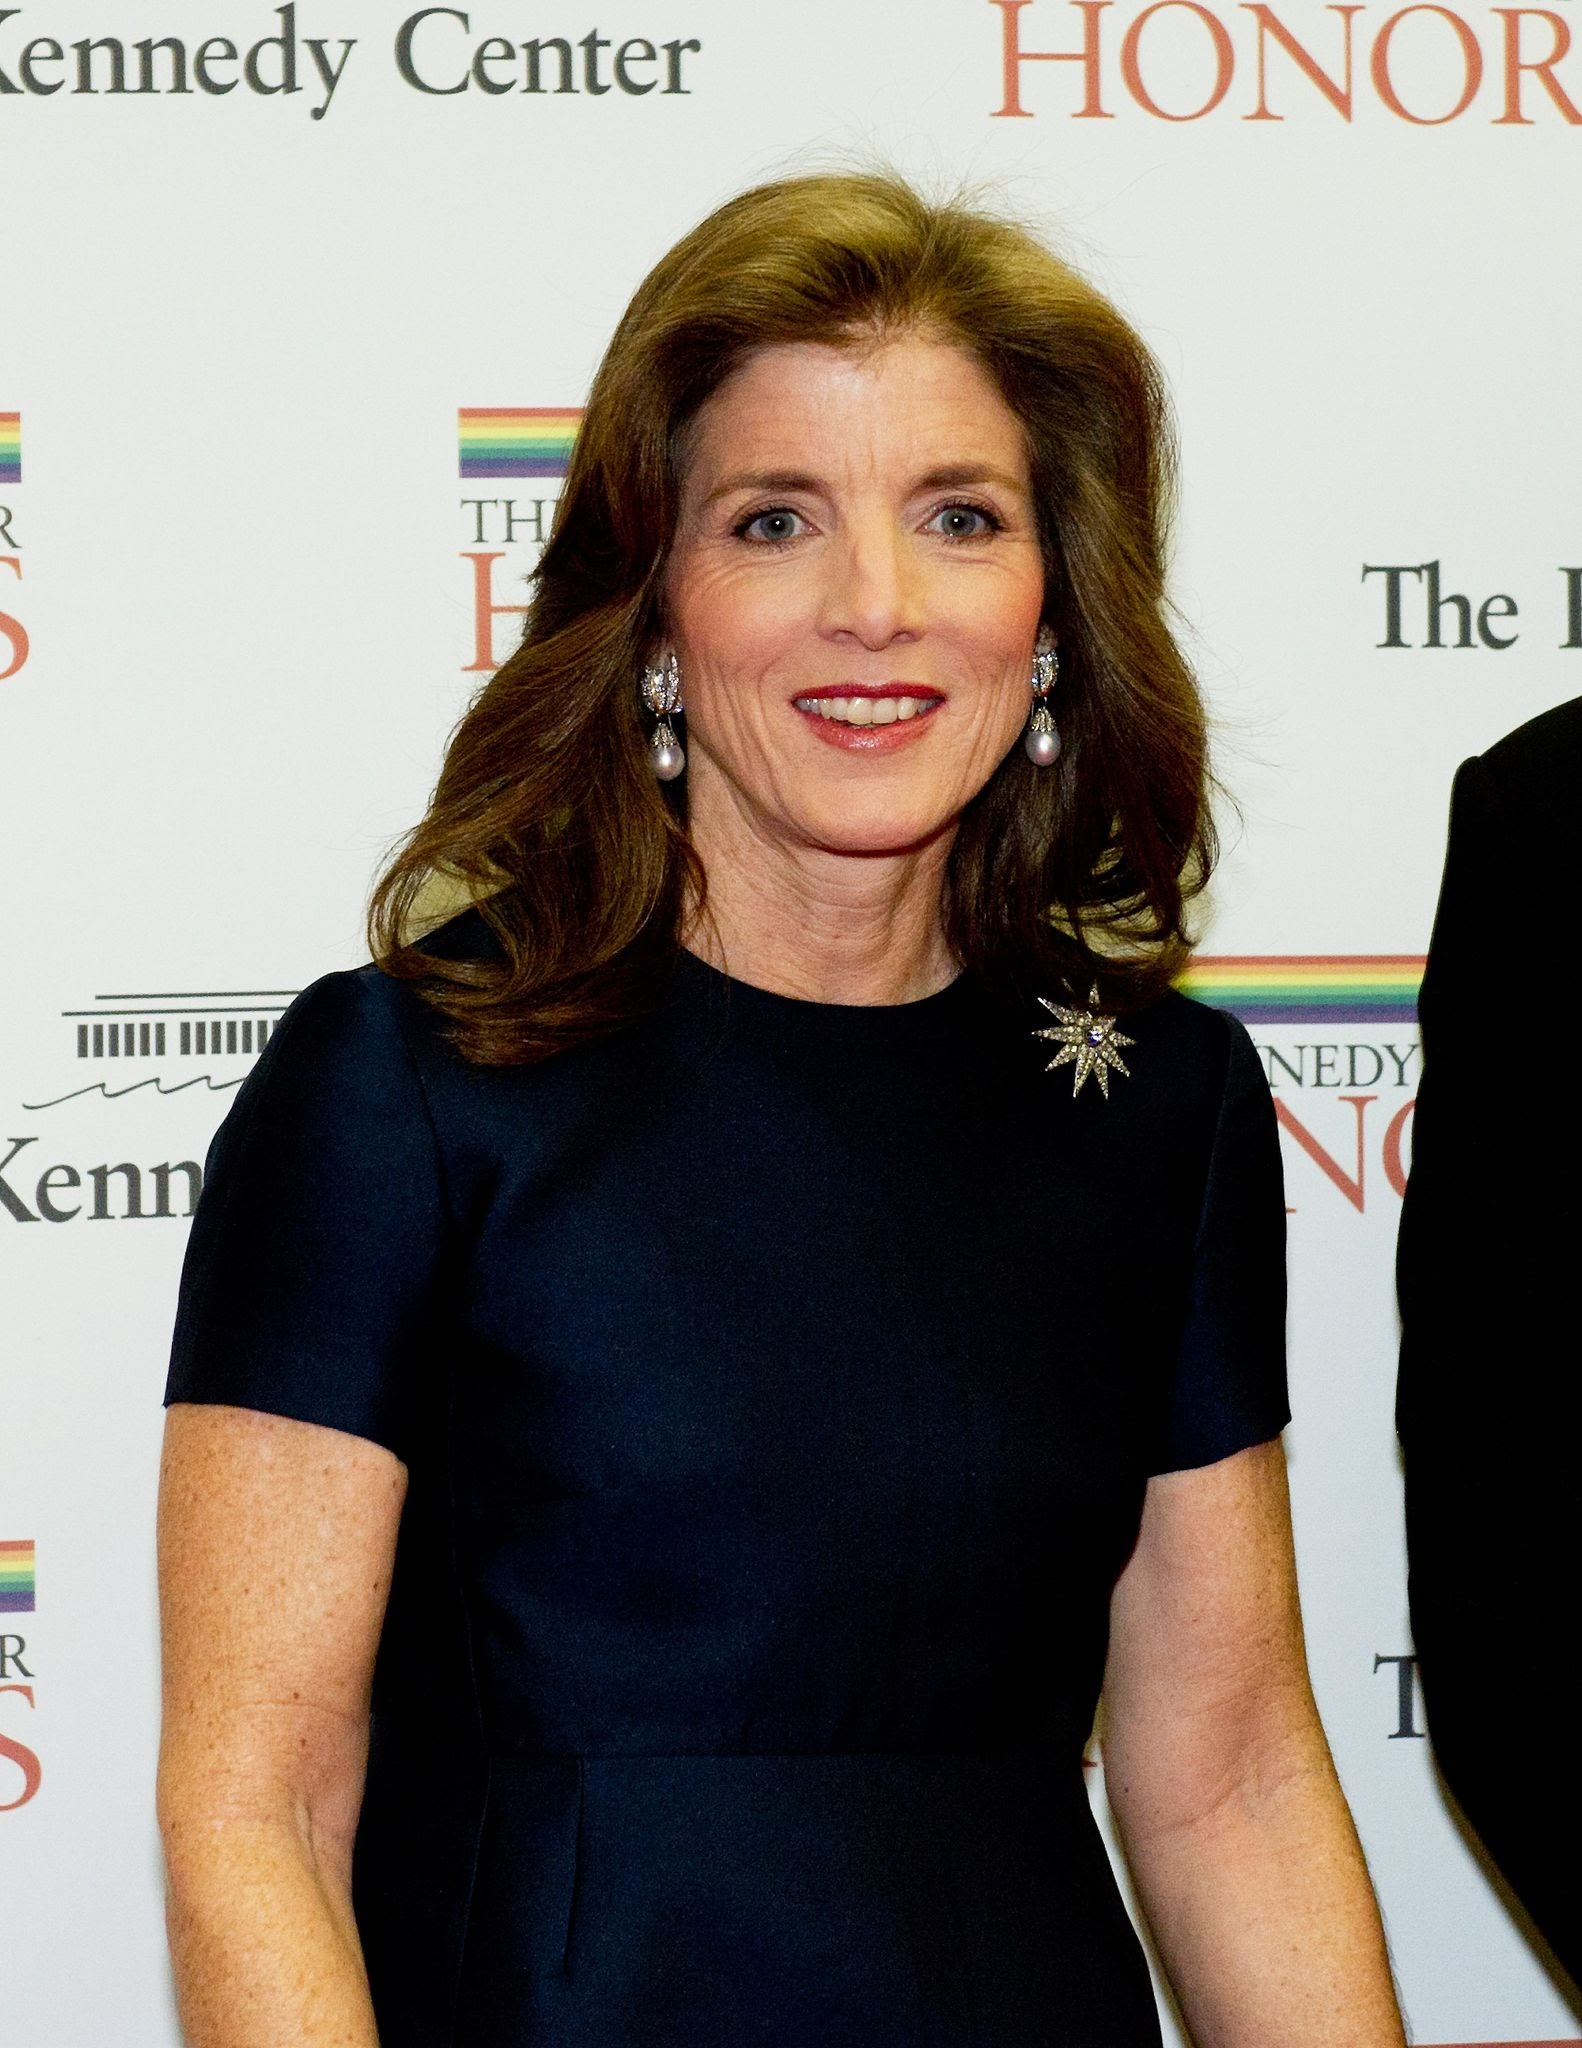 Caroline Kennedy is an ambassador of the US government